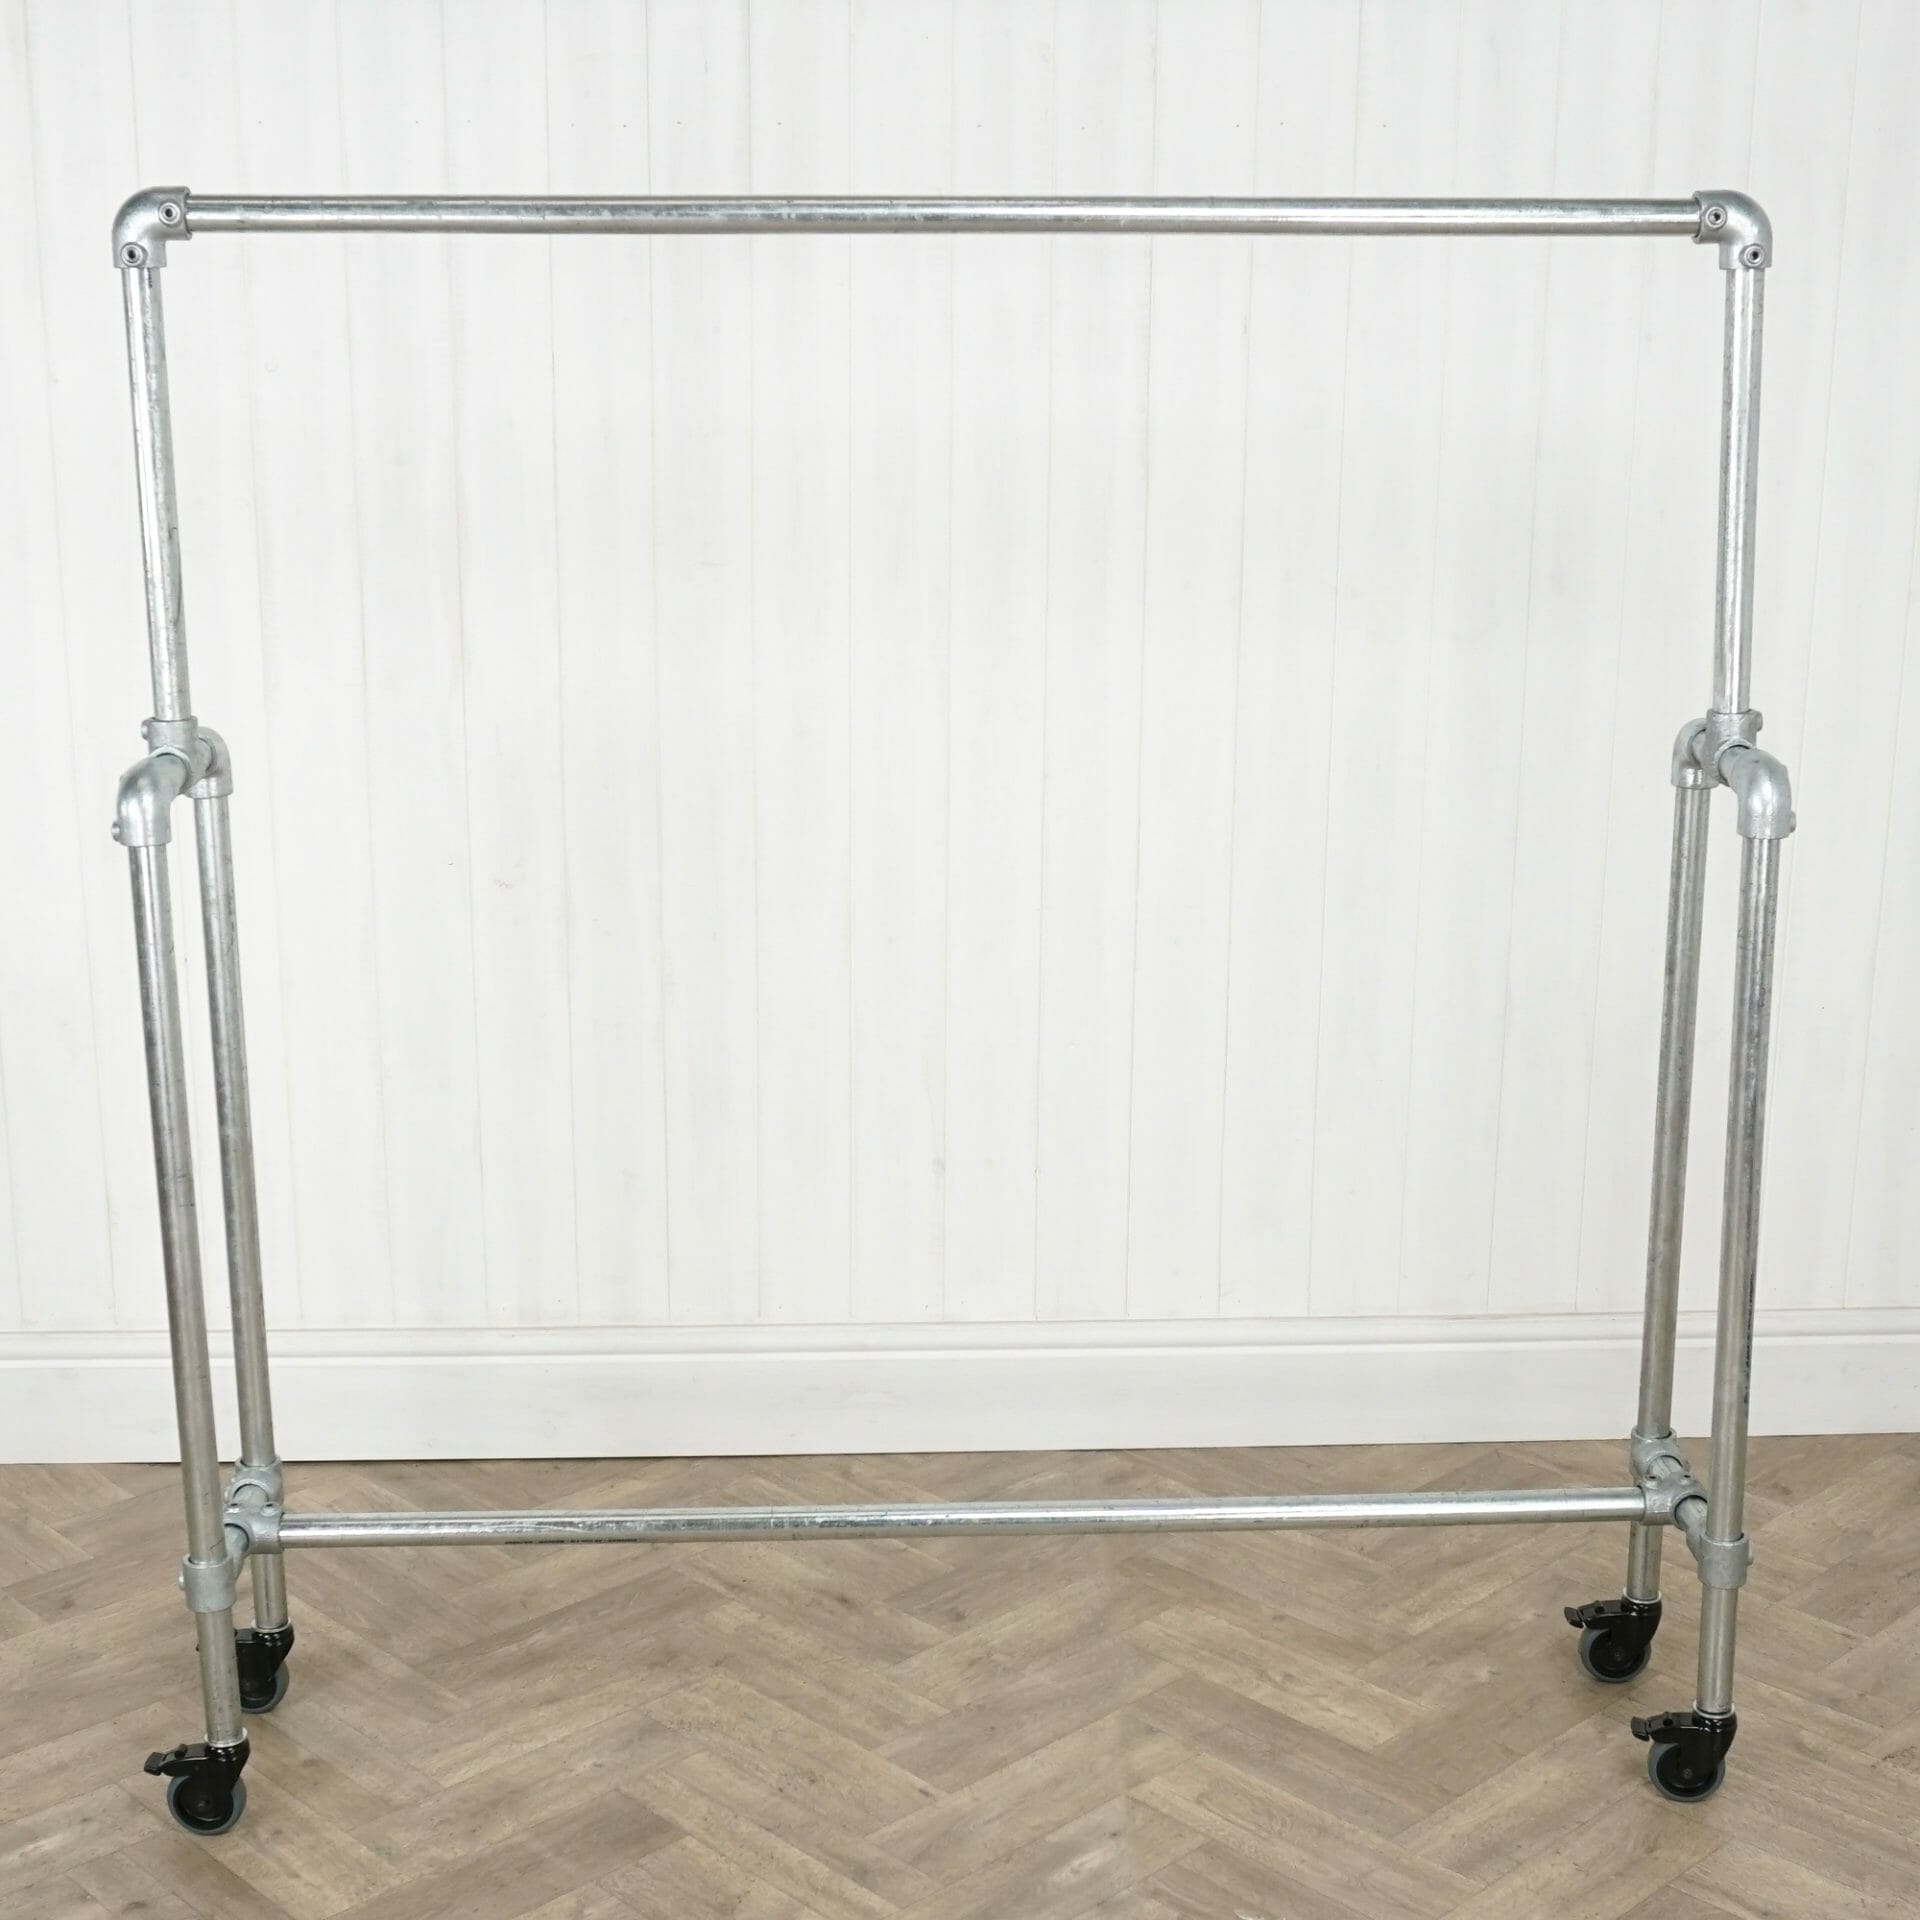 Freestanding Clothes Rail with Wheels - Pipe Dream Furniture